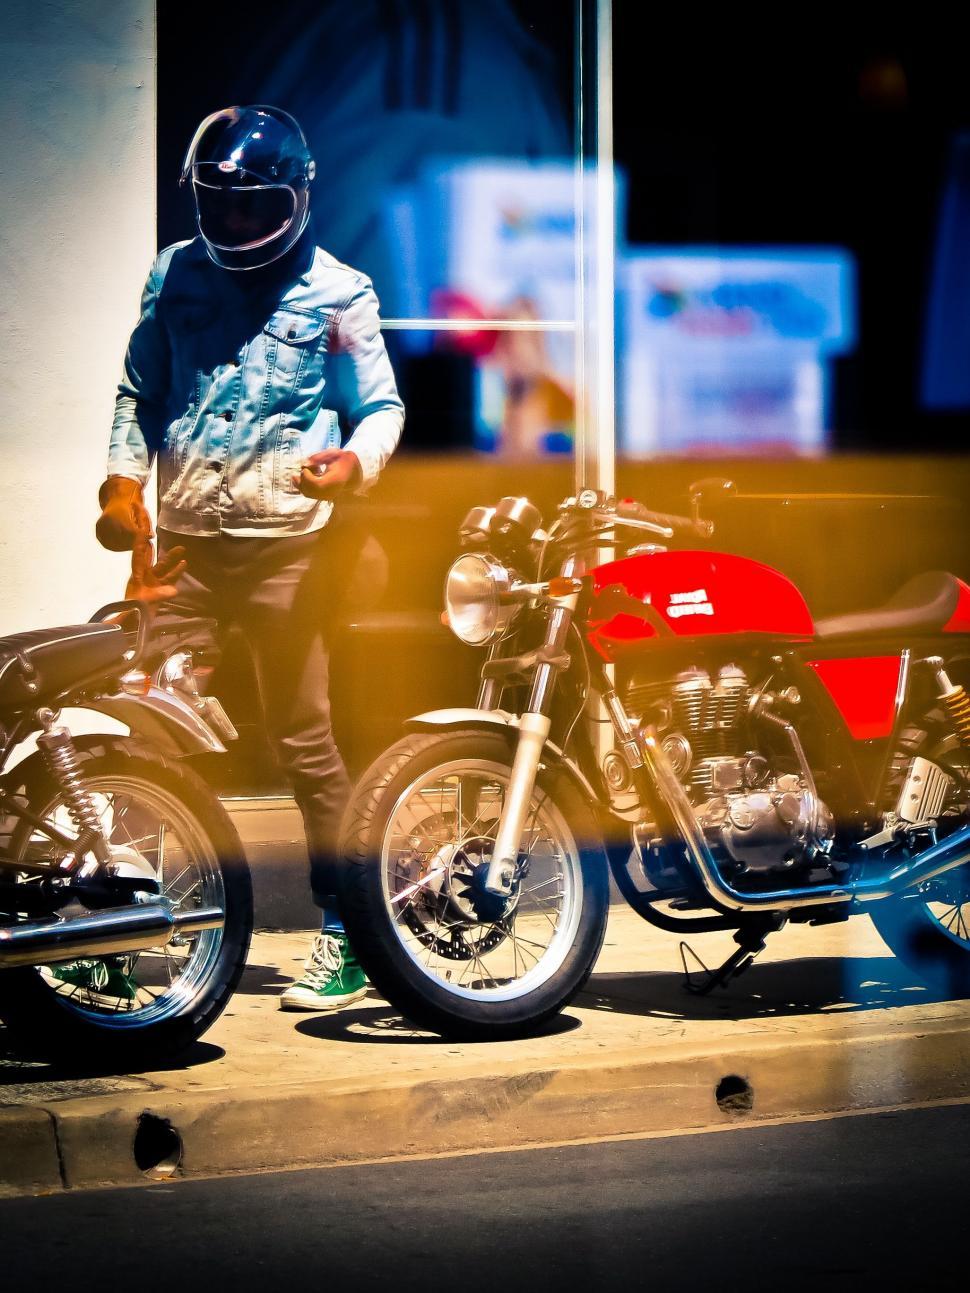 Free Image of Man Sitting on Motorcycle Next to Another Bike 